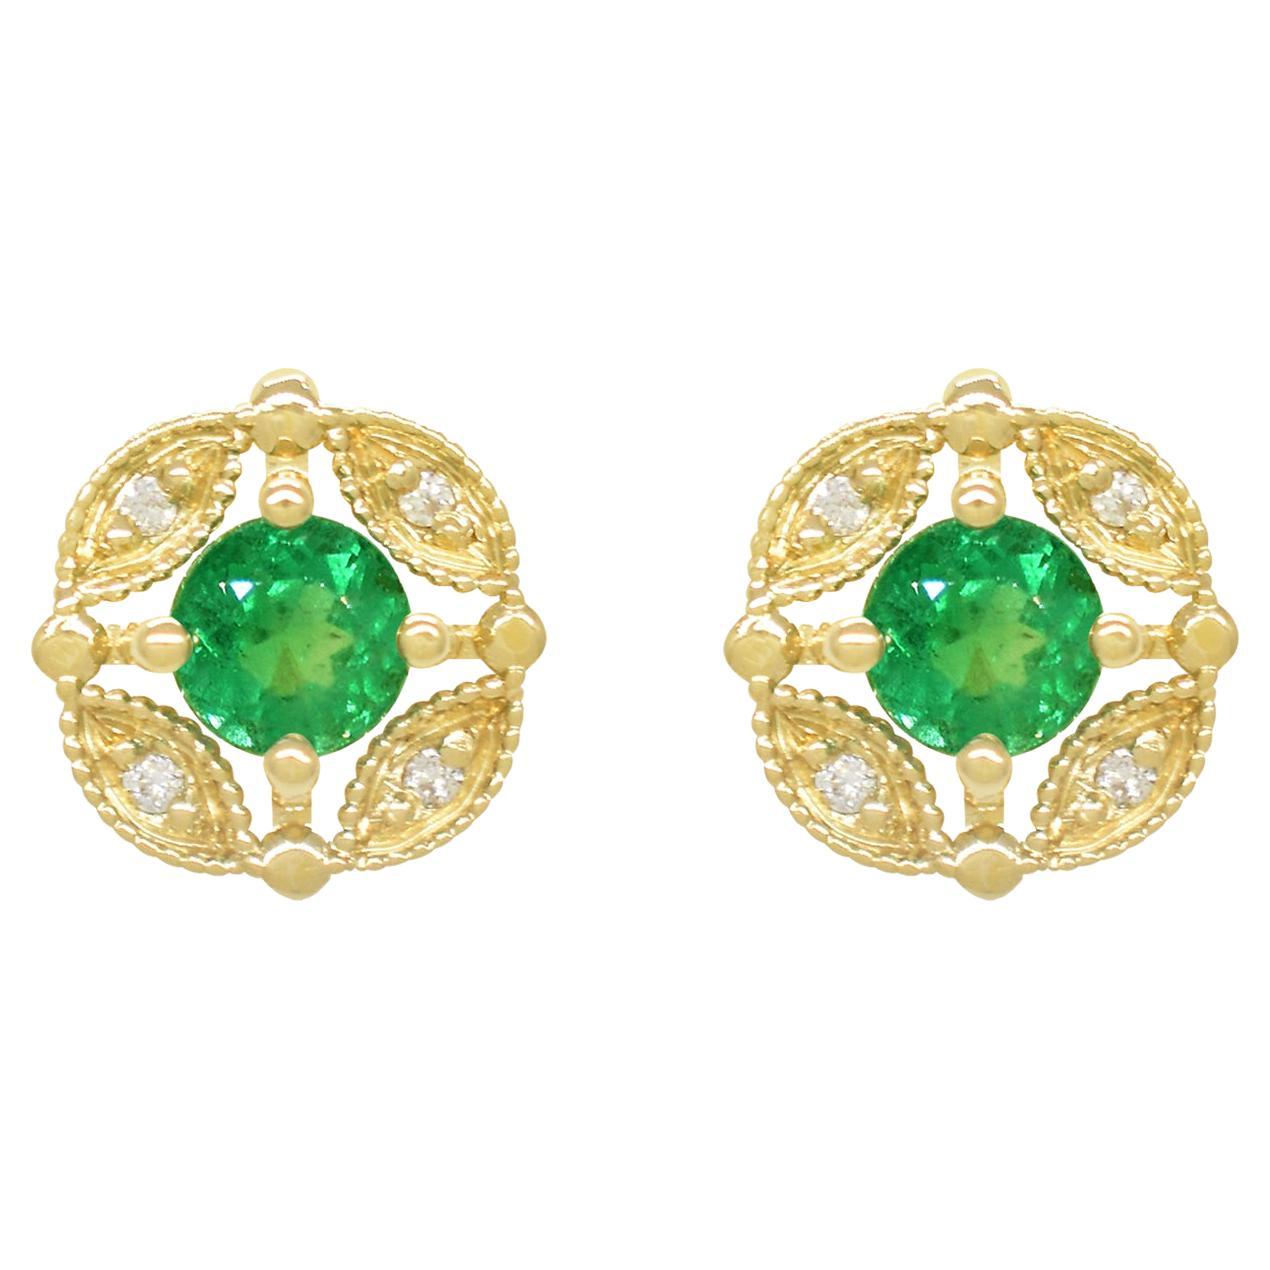 0.50 Carats Total Weight Emerald and Diamond Earrings in Solid 18K Gold 